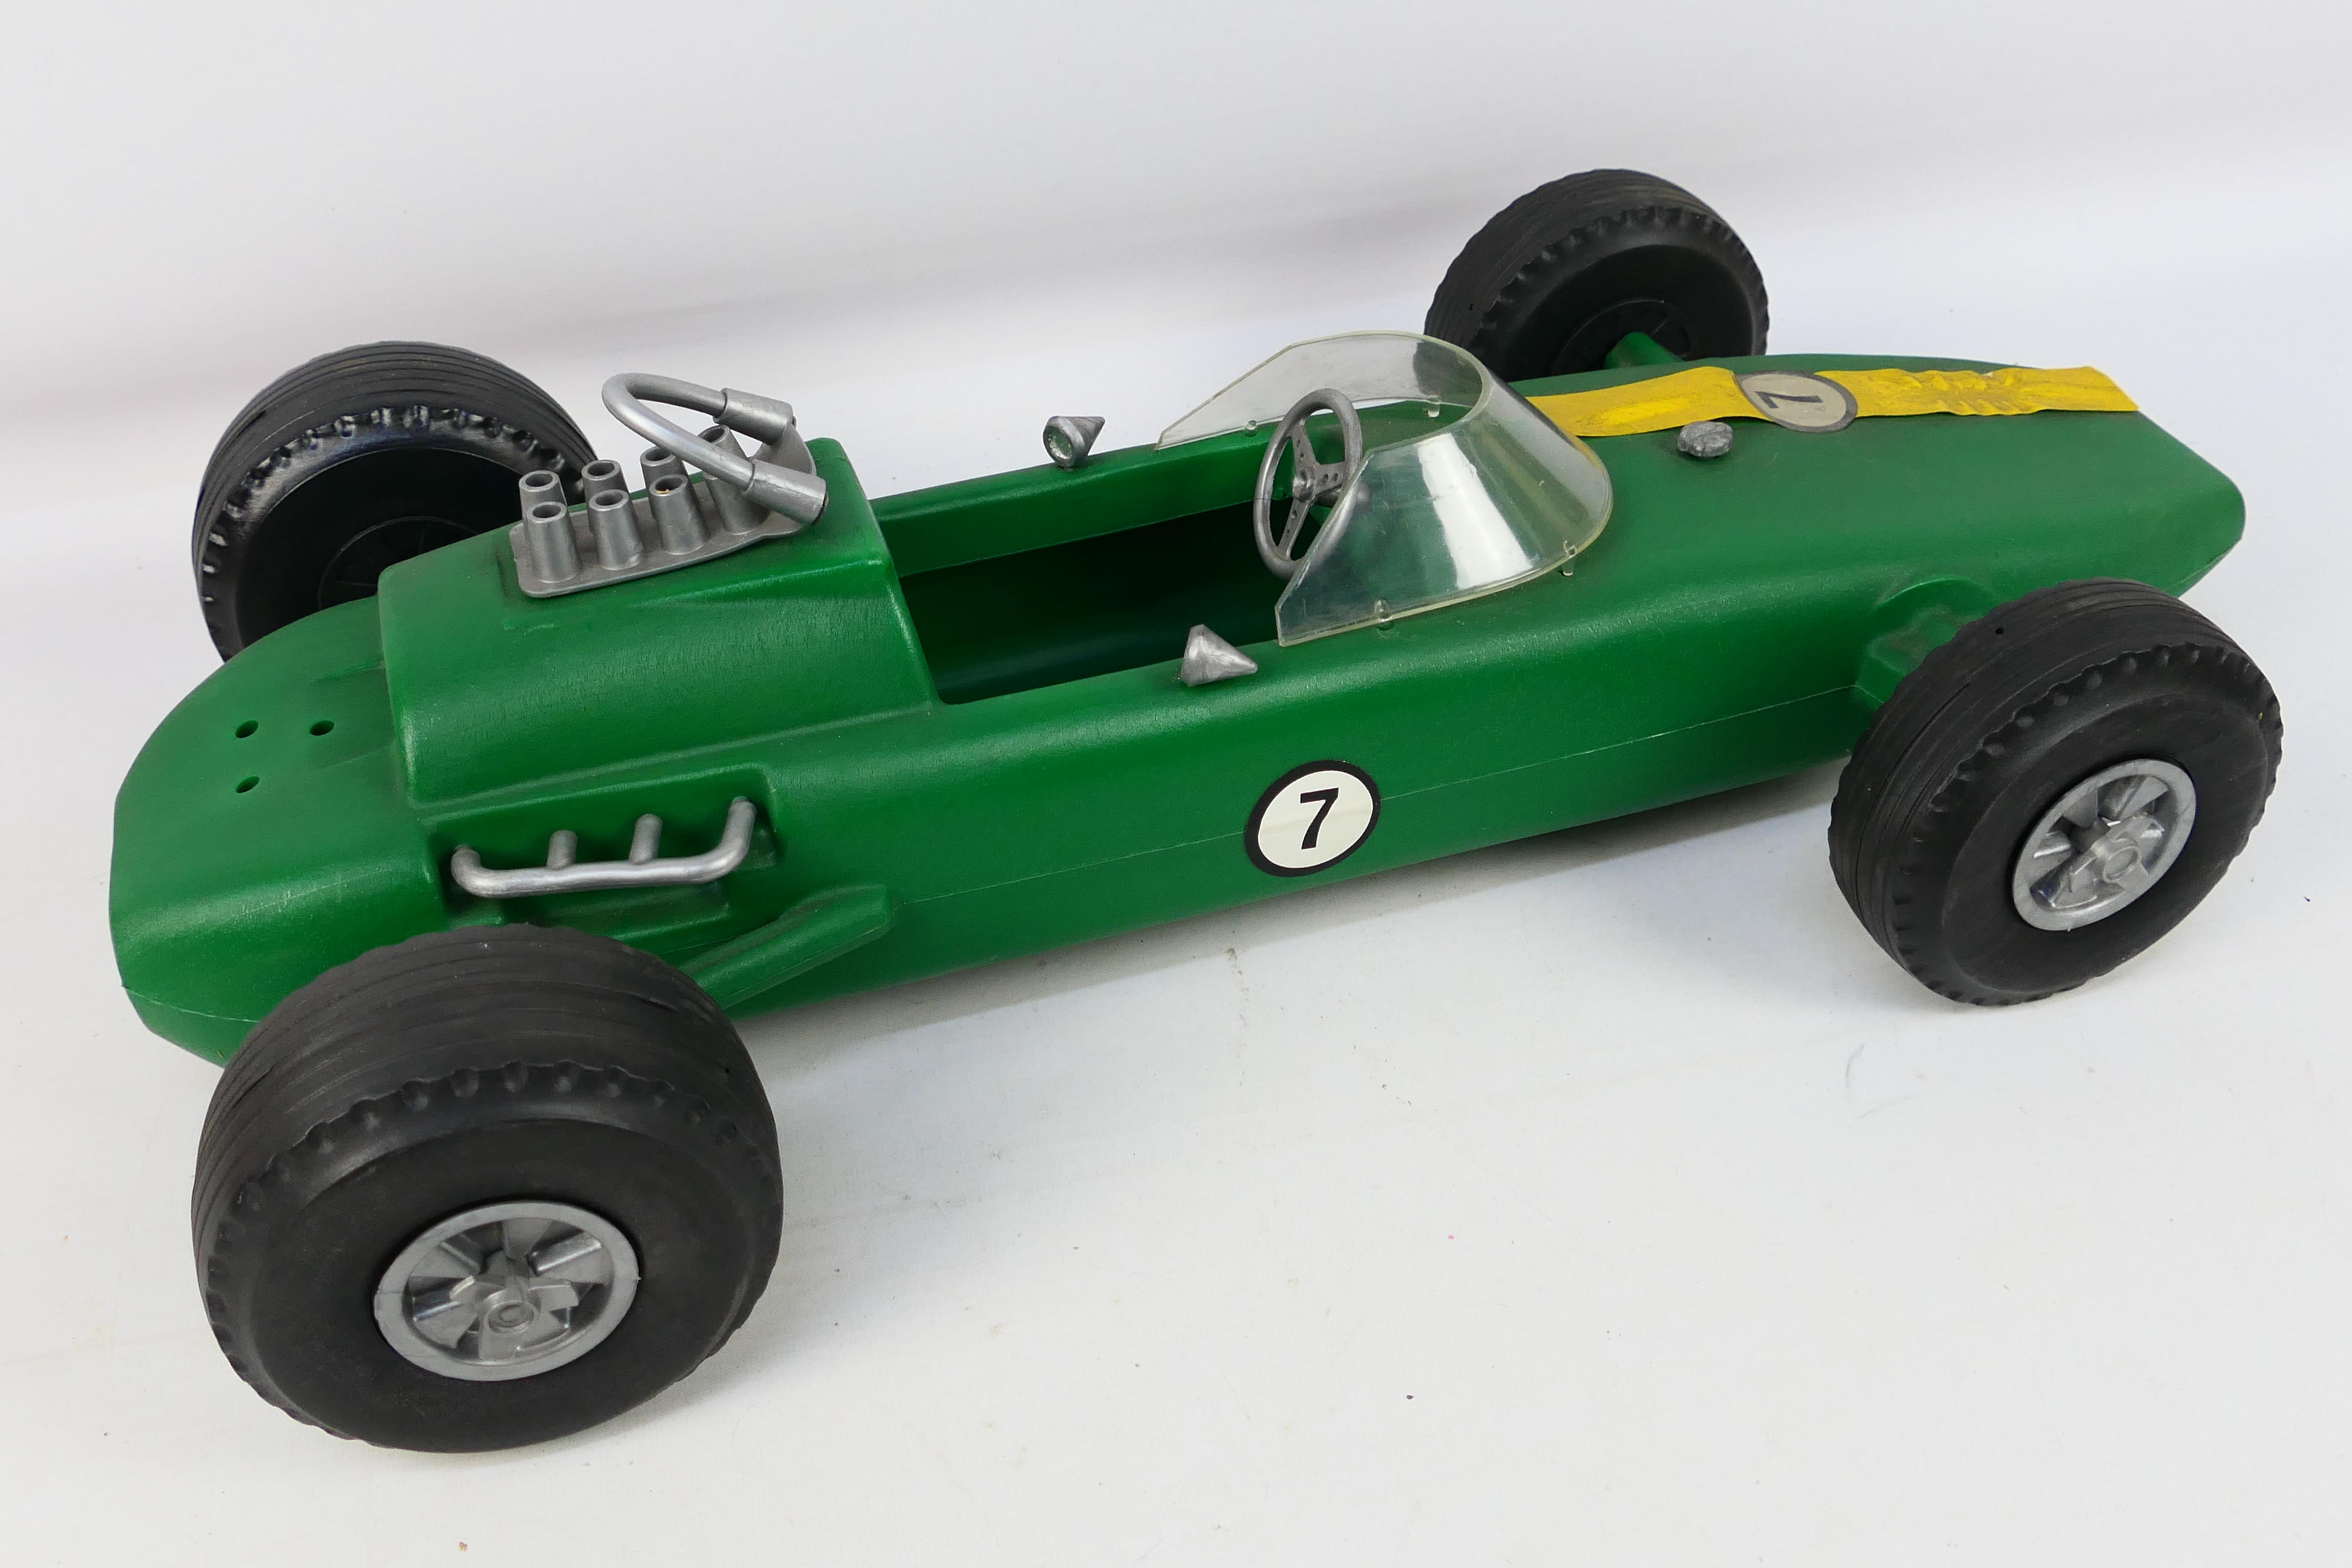 Palitoy - Action Man - An Action Man Grange Prix Racing Car (#34810) 60cm long This item is the car - Image 4 of 9